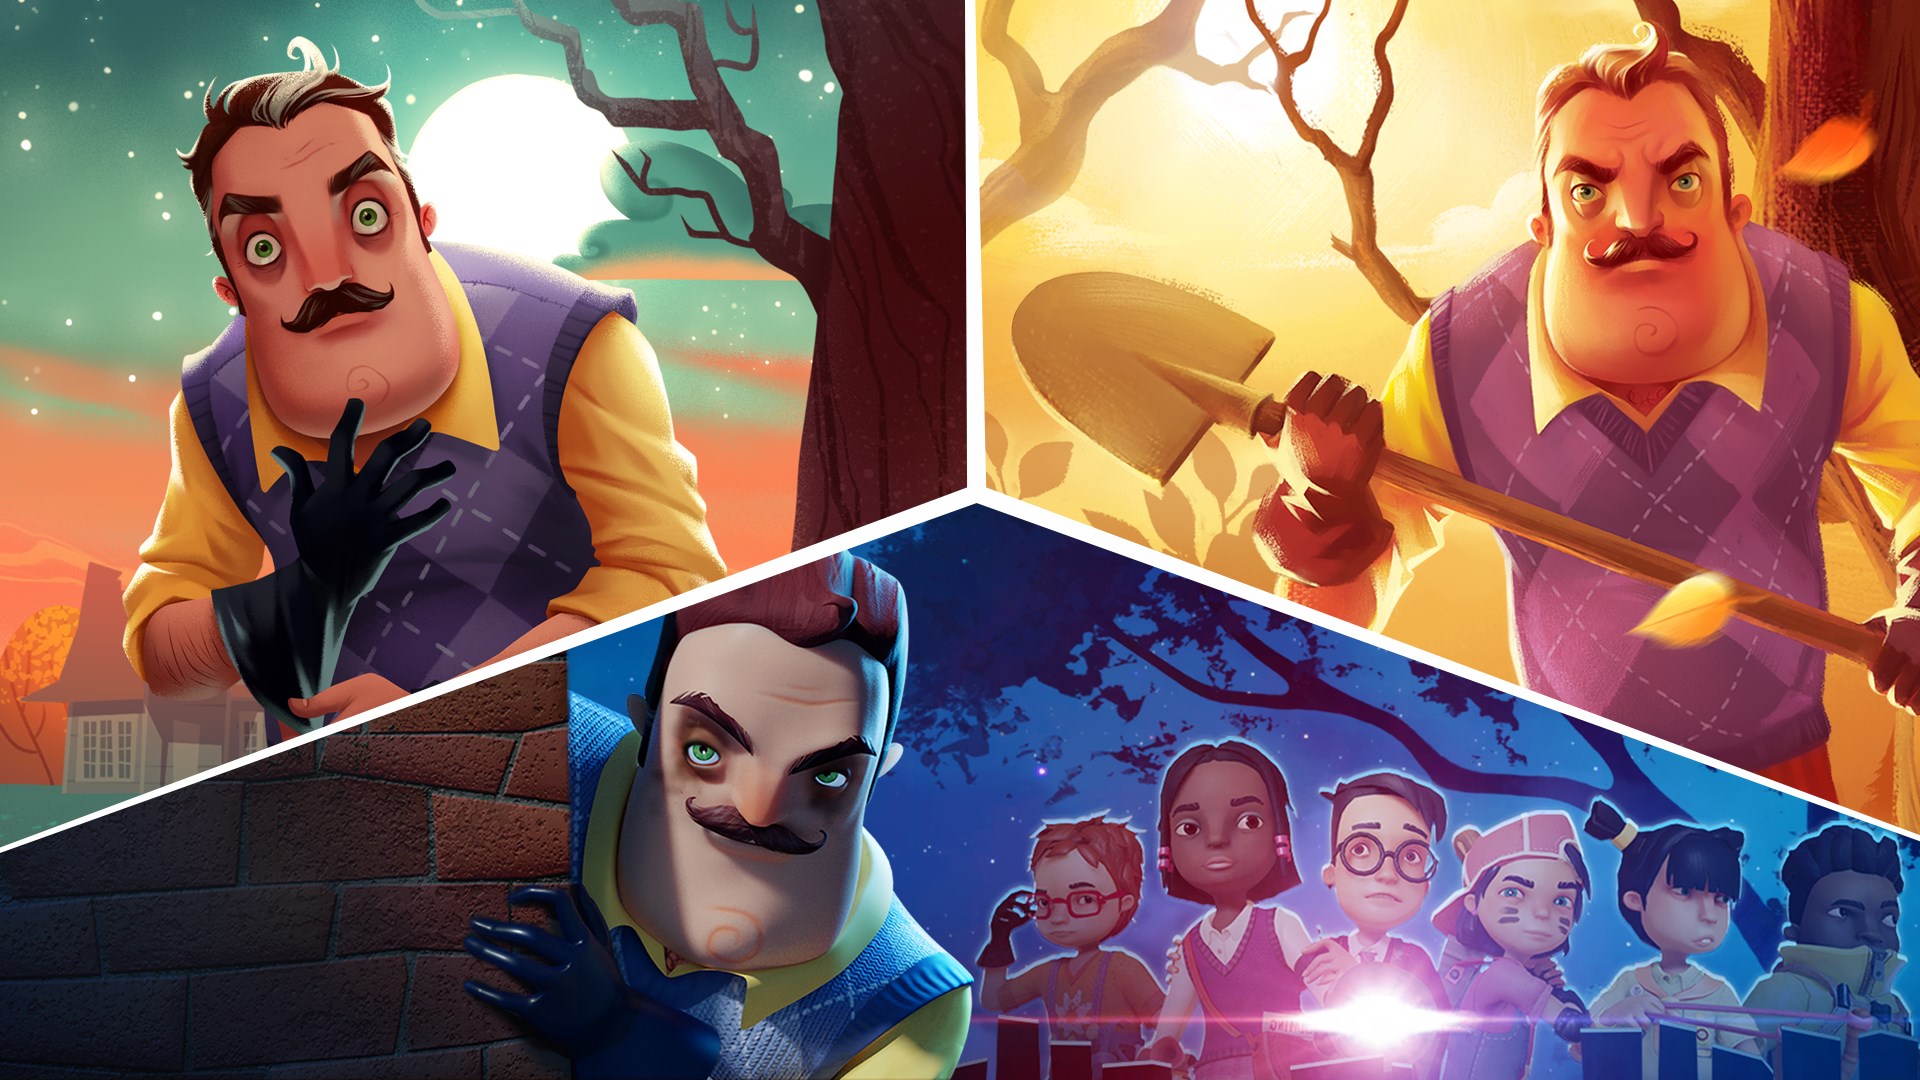 Horror game 'Hello Neighbor' is heading to PS4 and Switch